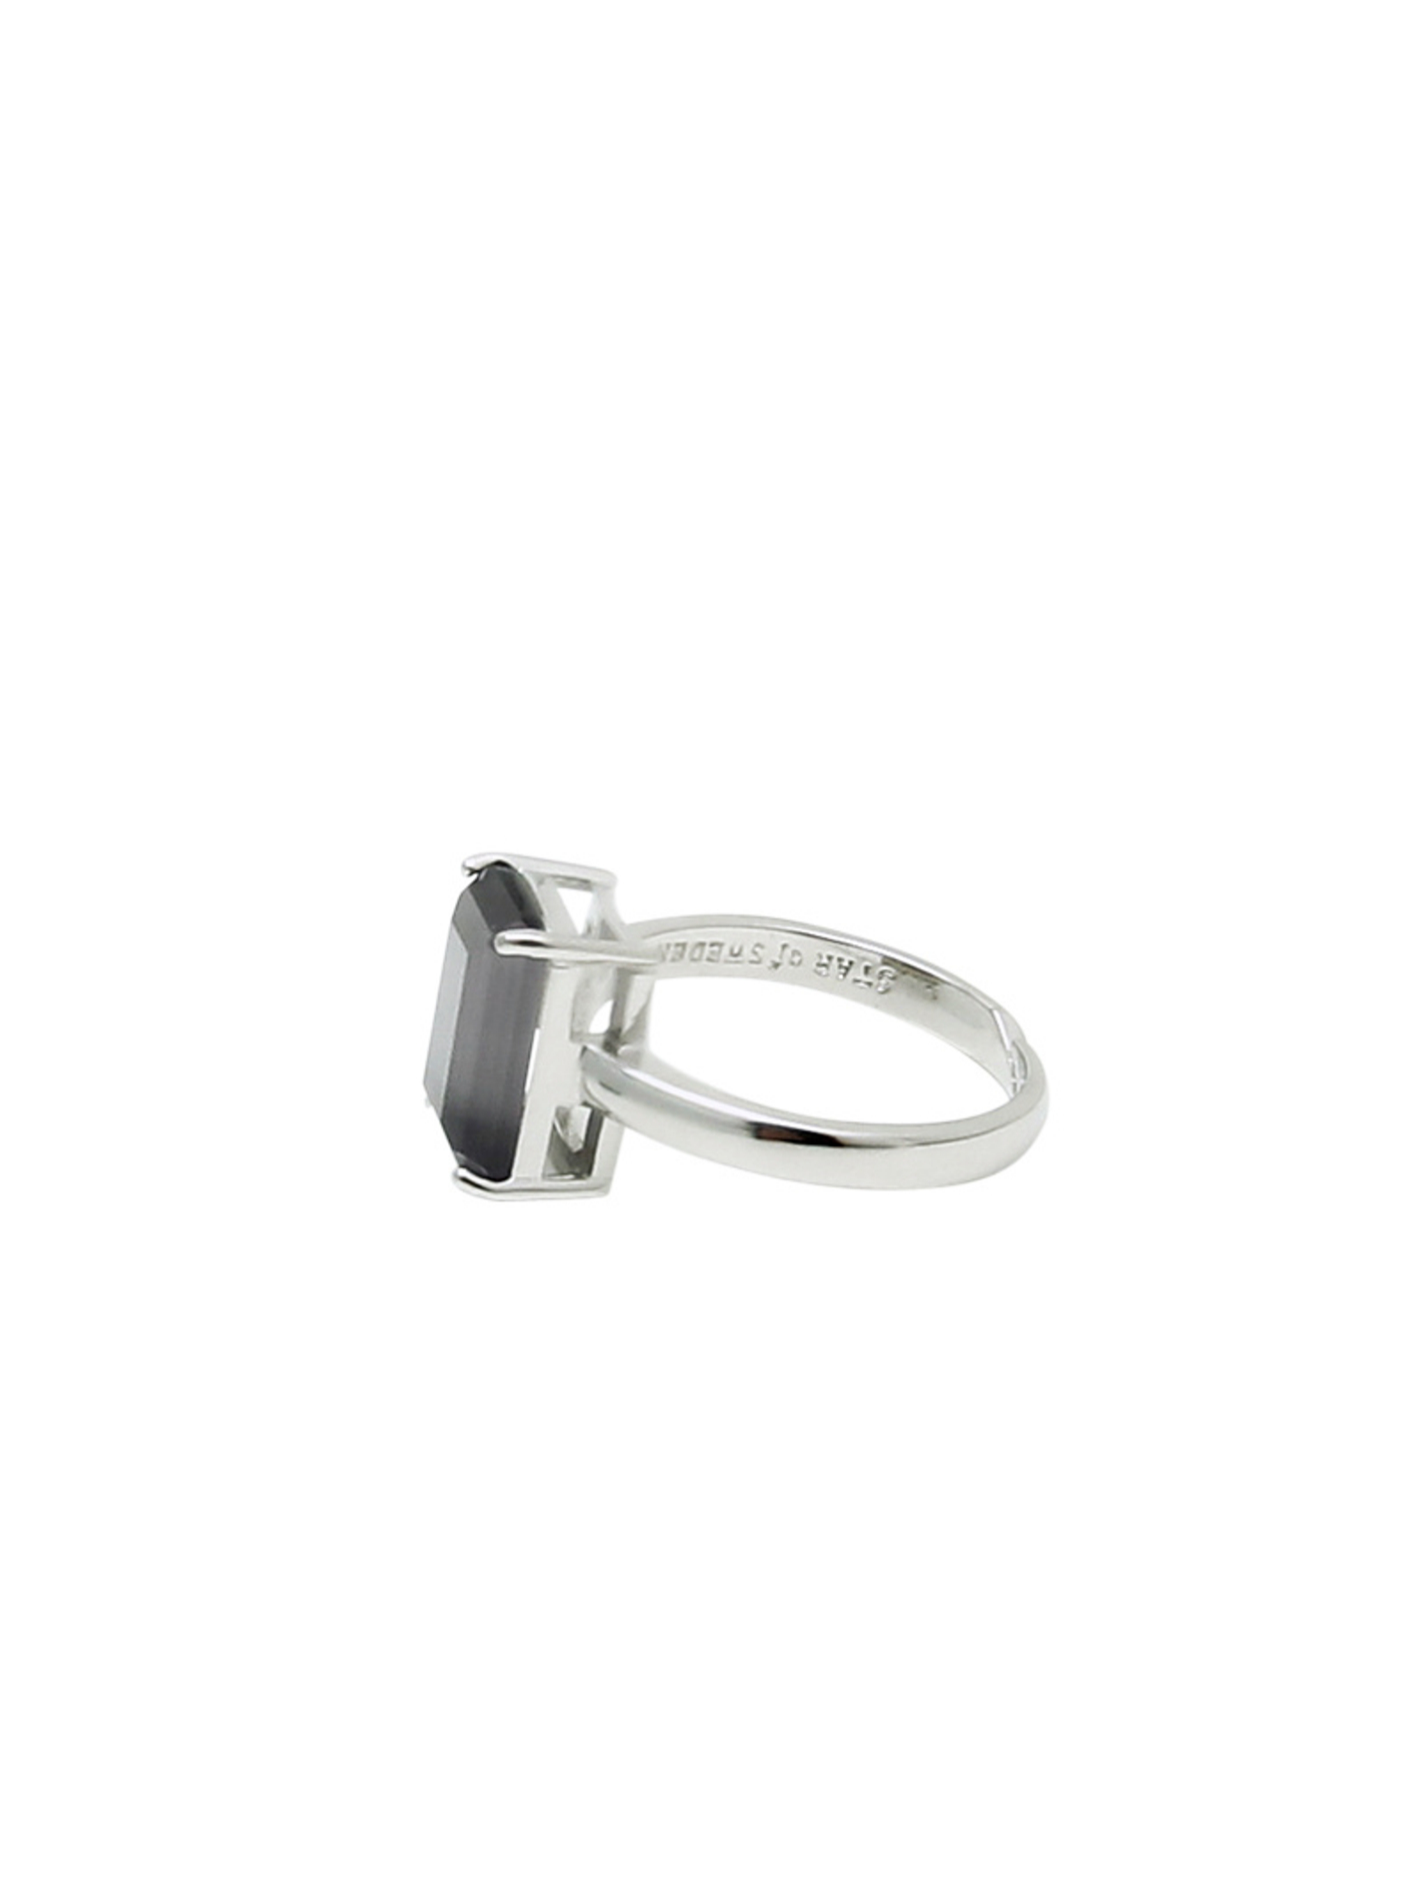 Say-Yes-Ring-Gracy-gray-silver-2